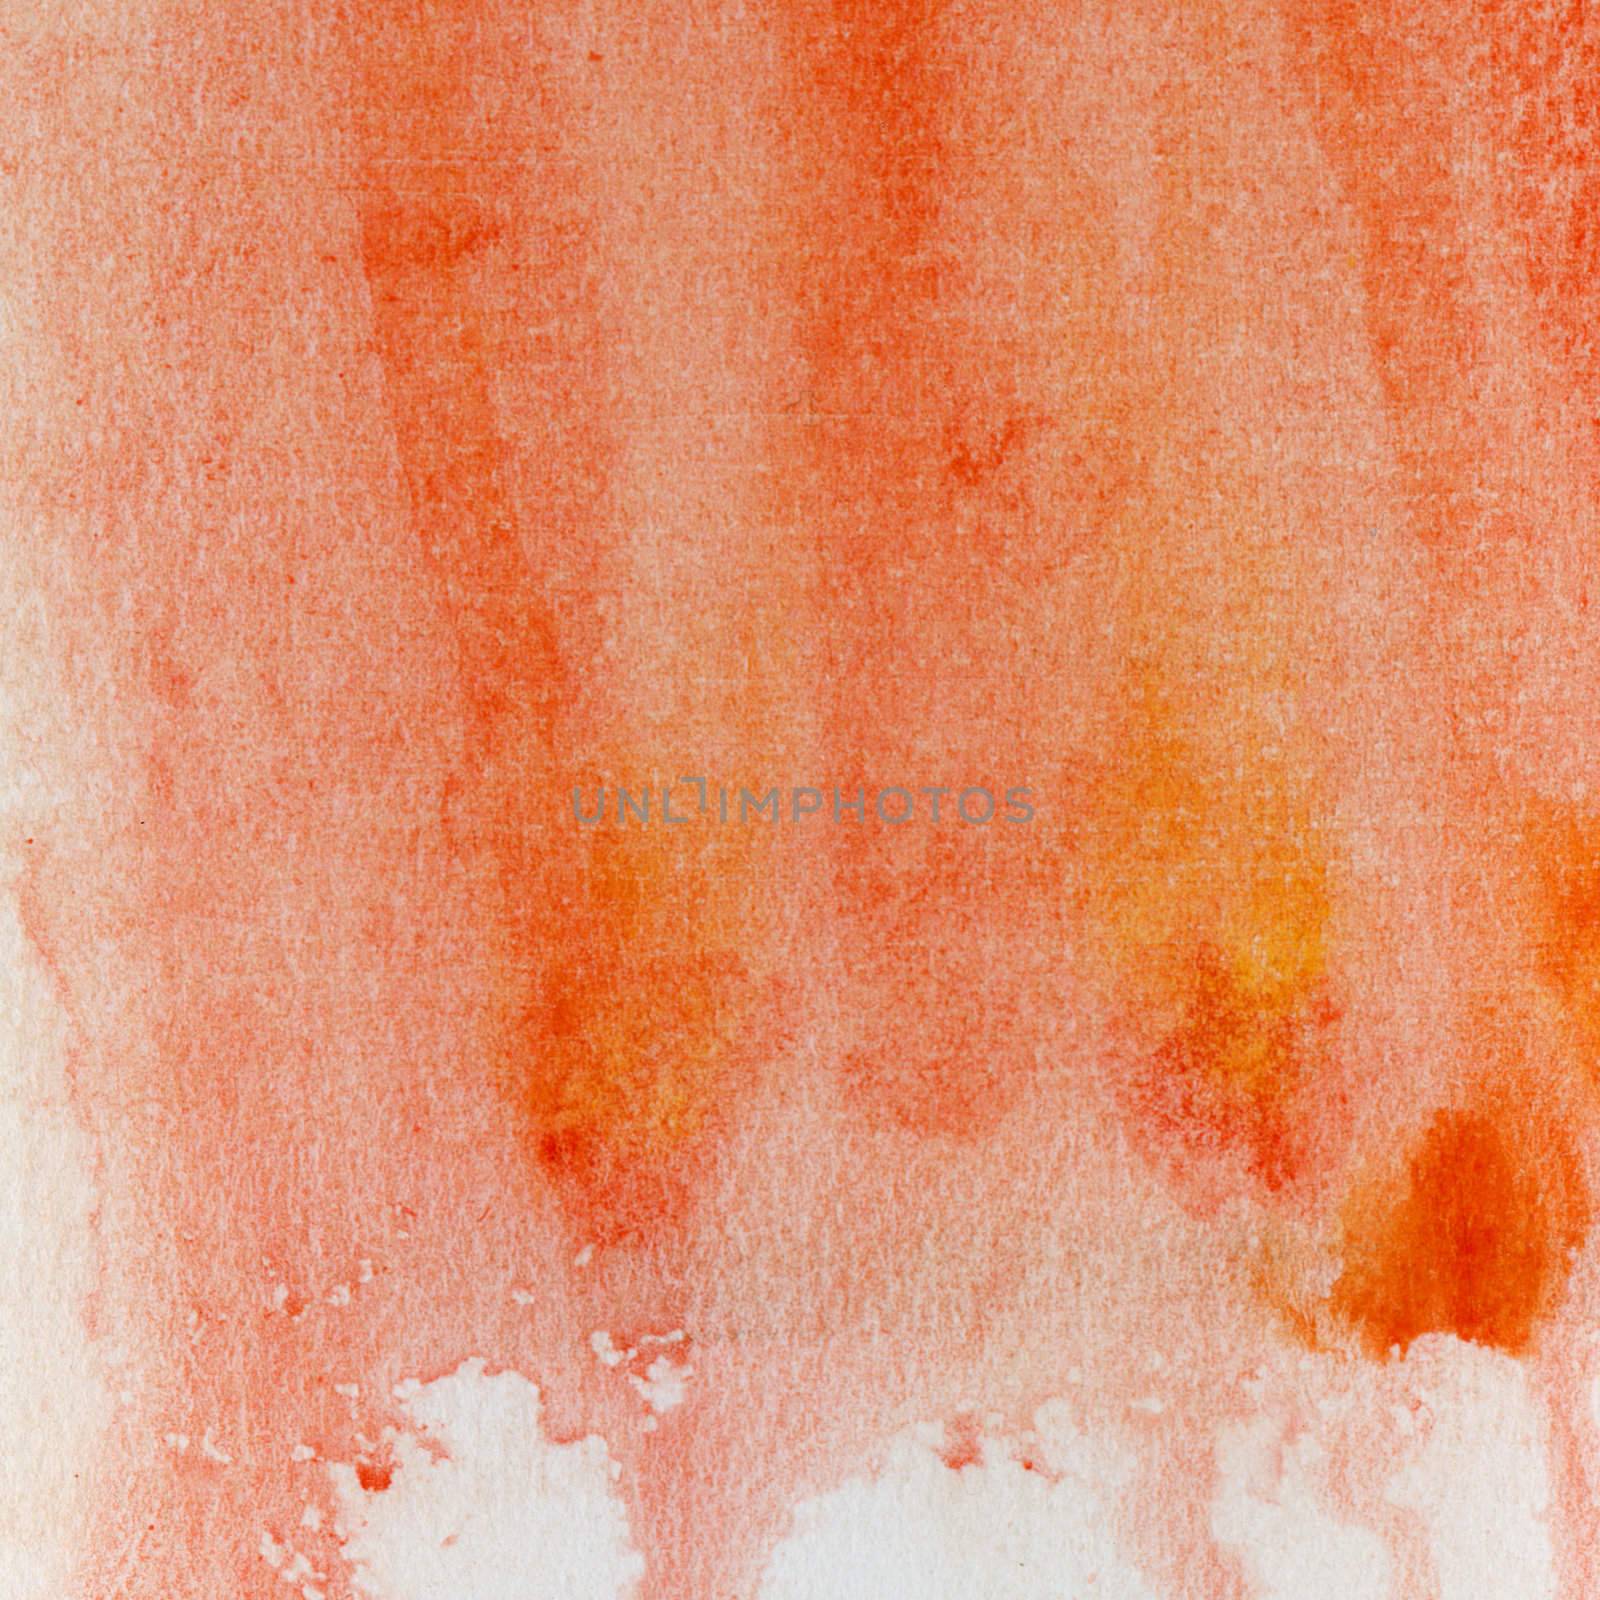 red and orange watercolor background hand painted on paper witch scratch texture, self made